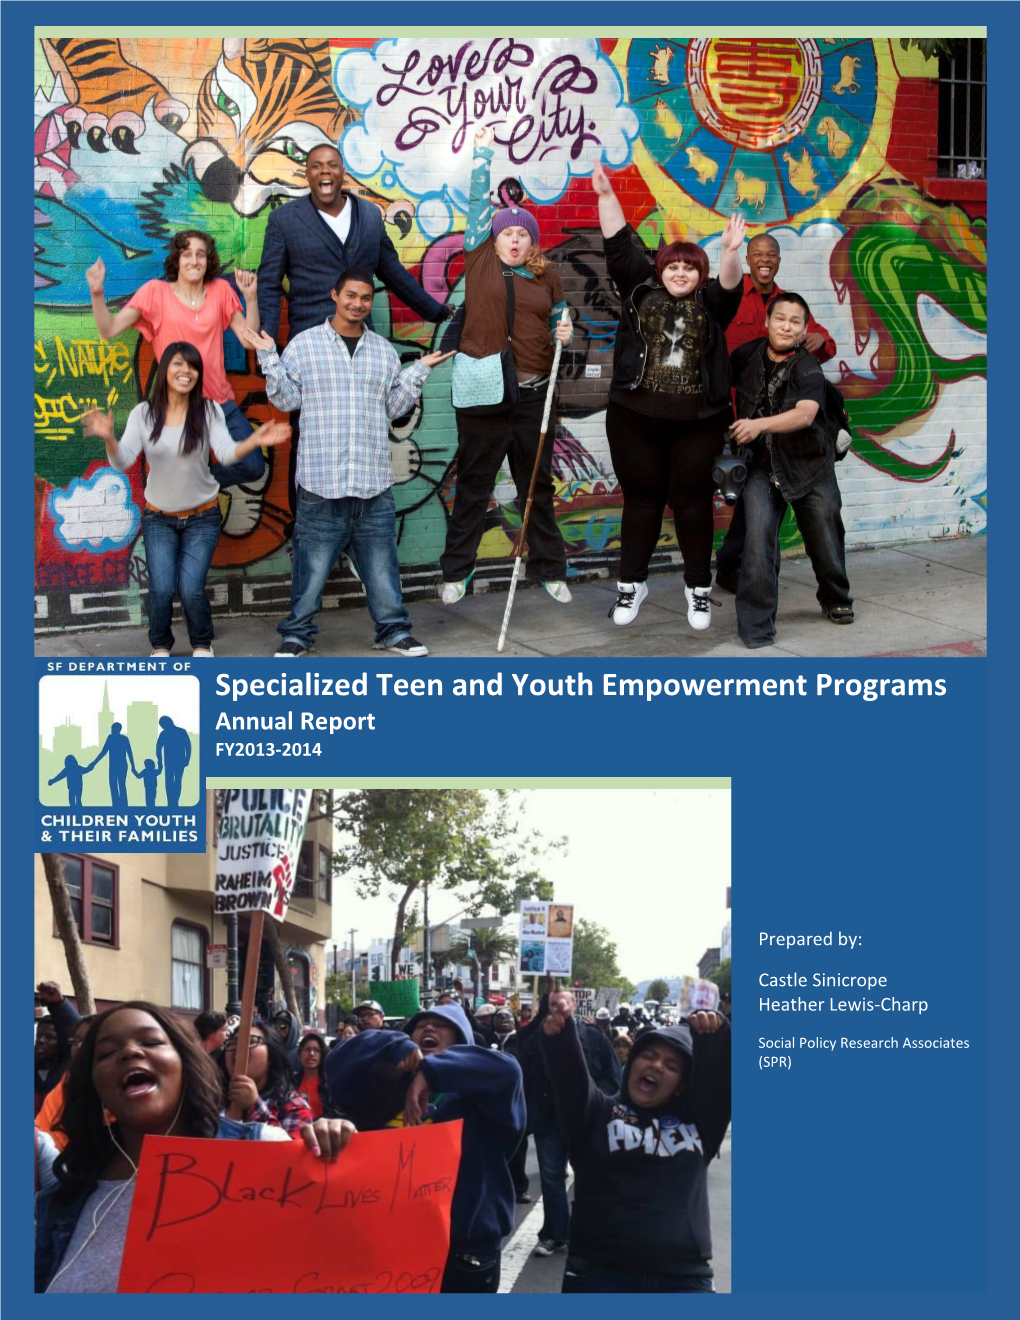 Specialized Teen and Youth Empowerment Programs Annual Report FY2013-2014